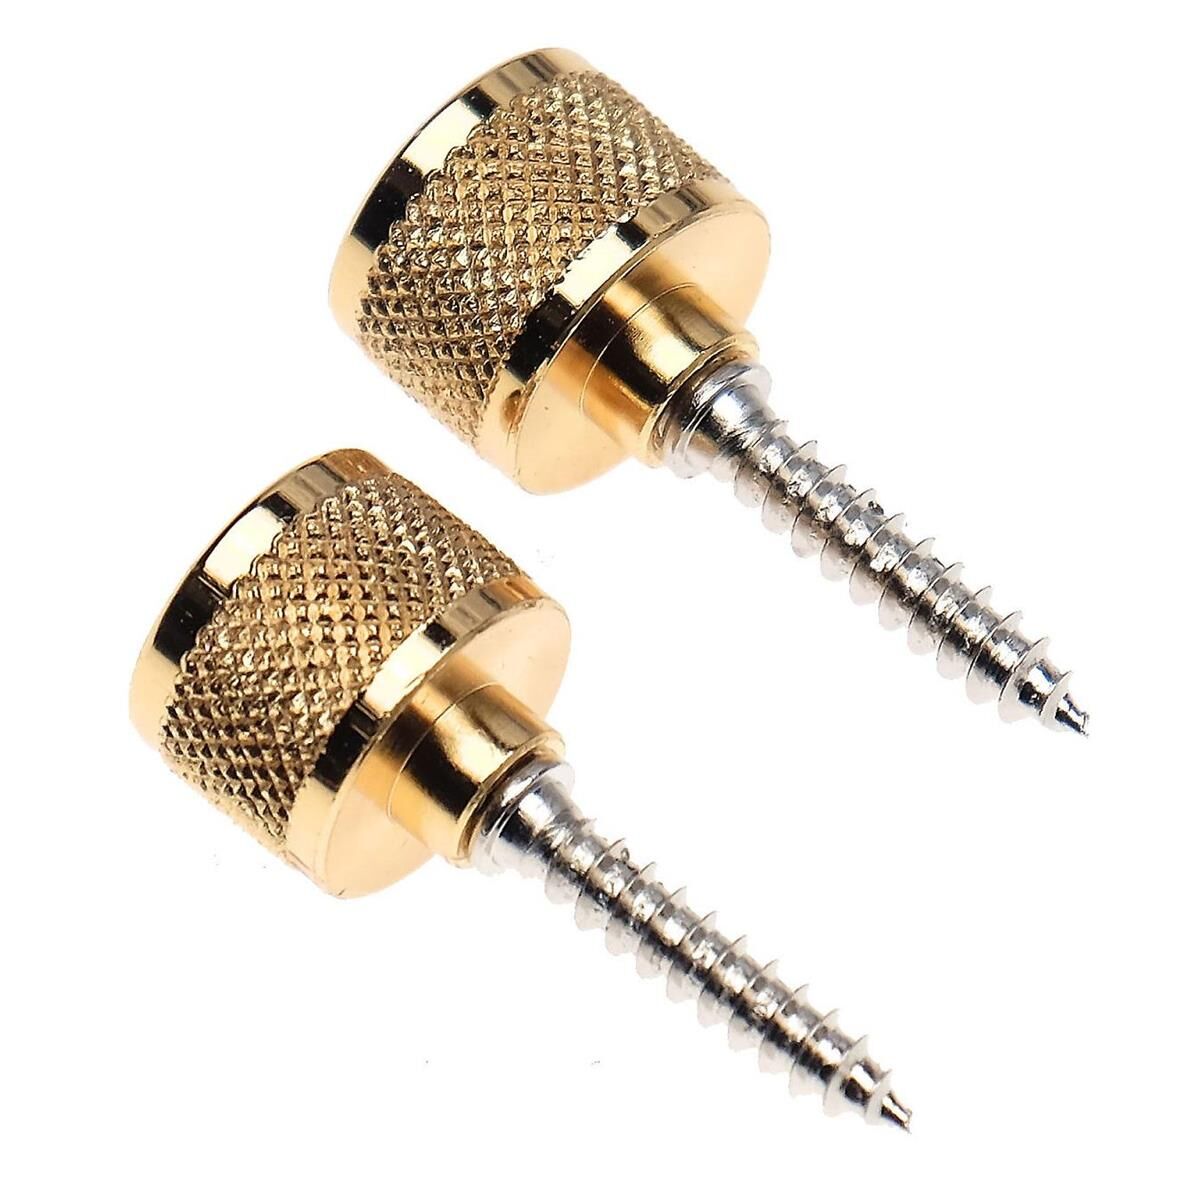 Gretsch Strap Buttons with Mounting Hardware for Guitars, Gold